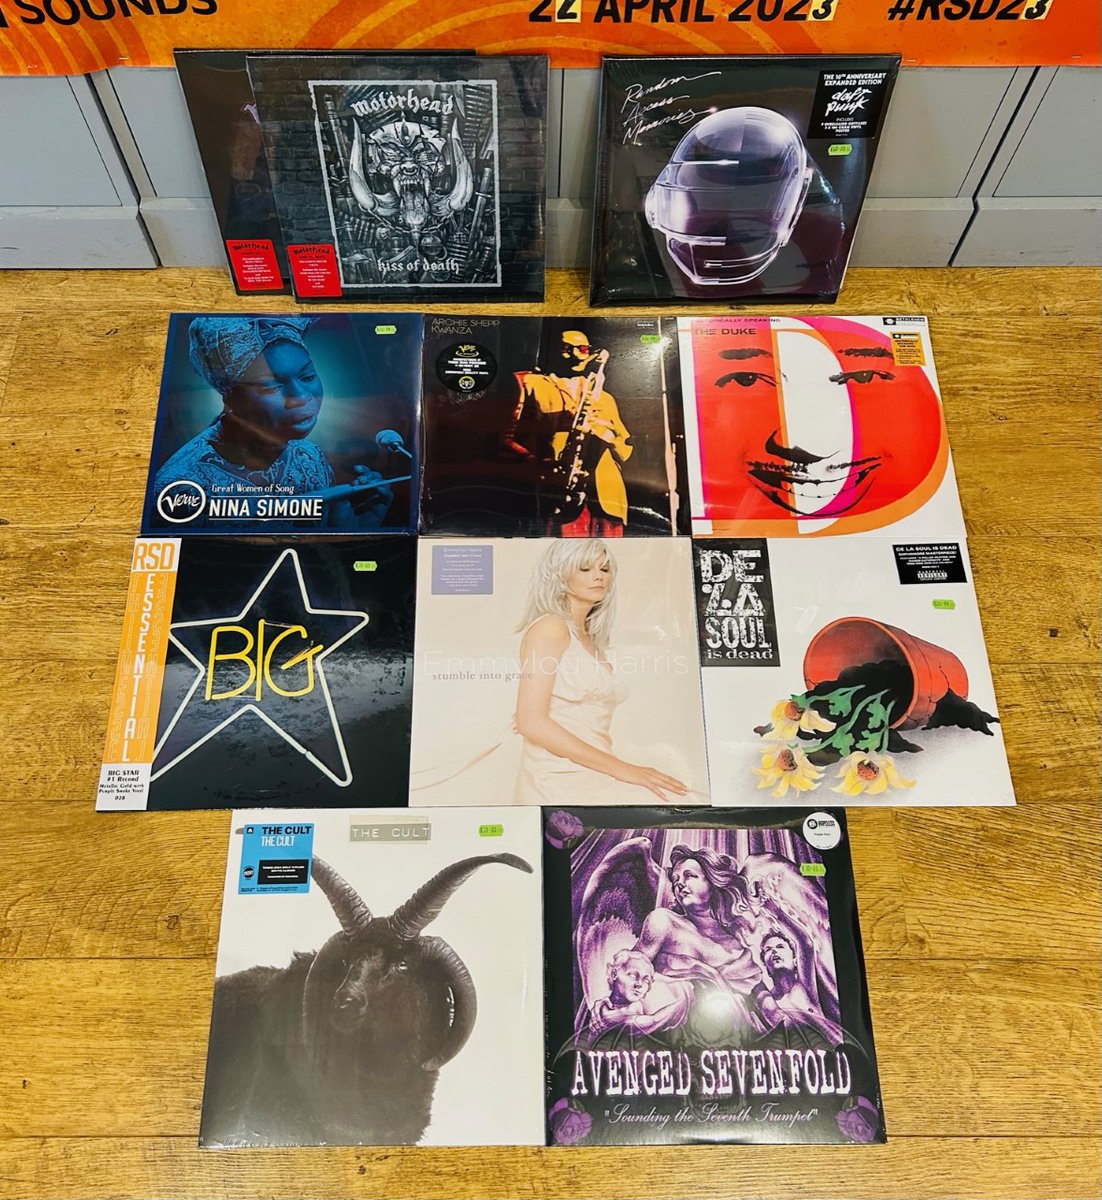 #NewMusicFriday Big new albums from @alisongoldfrapp and @bccamplight (@dinkededition) among others plus 10 years of @daftpunk's iconic 'Random Access Memories' and reissues from Big Star, @officialcult, @WeAreDeLaSoul, @TheOfficialA7X and more #WaxUpdate